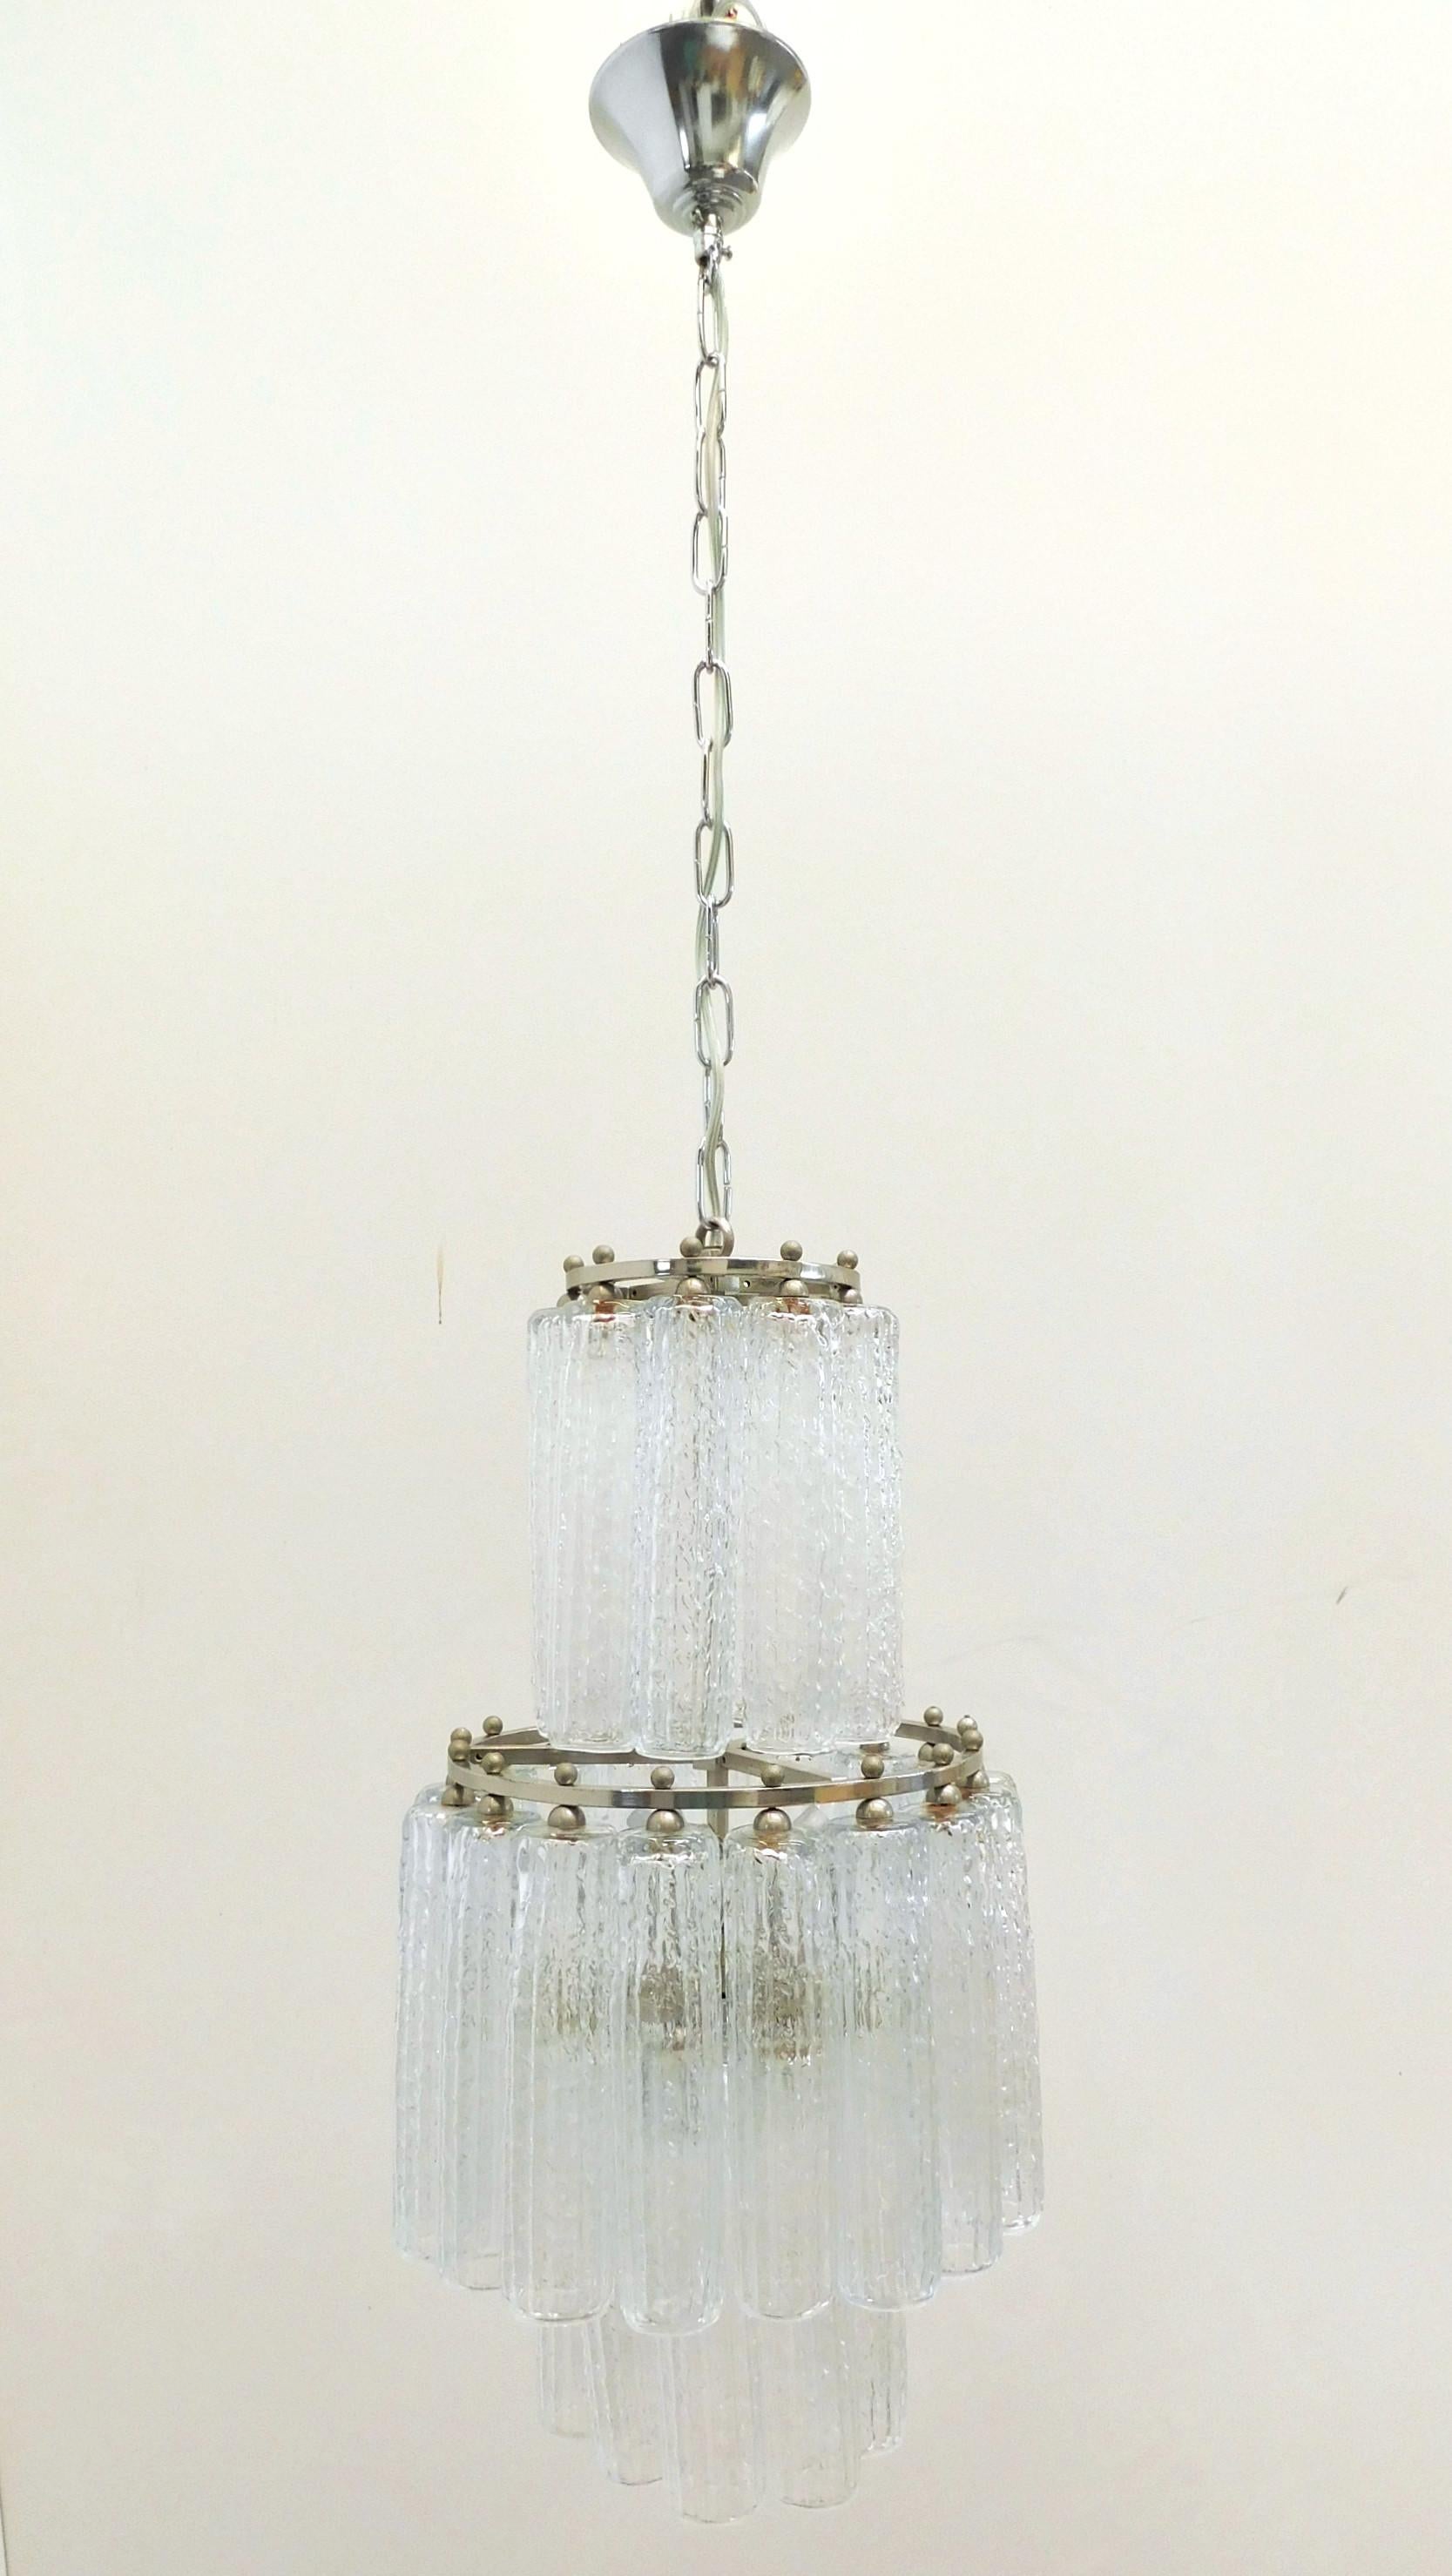 Vintage Italian chandelier with clear Murano glasses hand blown in cylindrical shapes and bark like effect using Corteccia technique, mounted in three layers on nickel metal frame / In the style of Venini, circa 1960s / Made in Italy
3 lights are